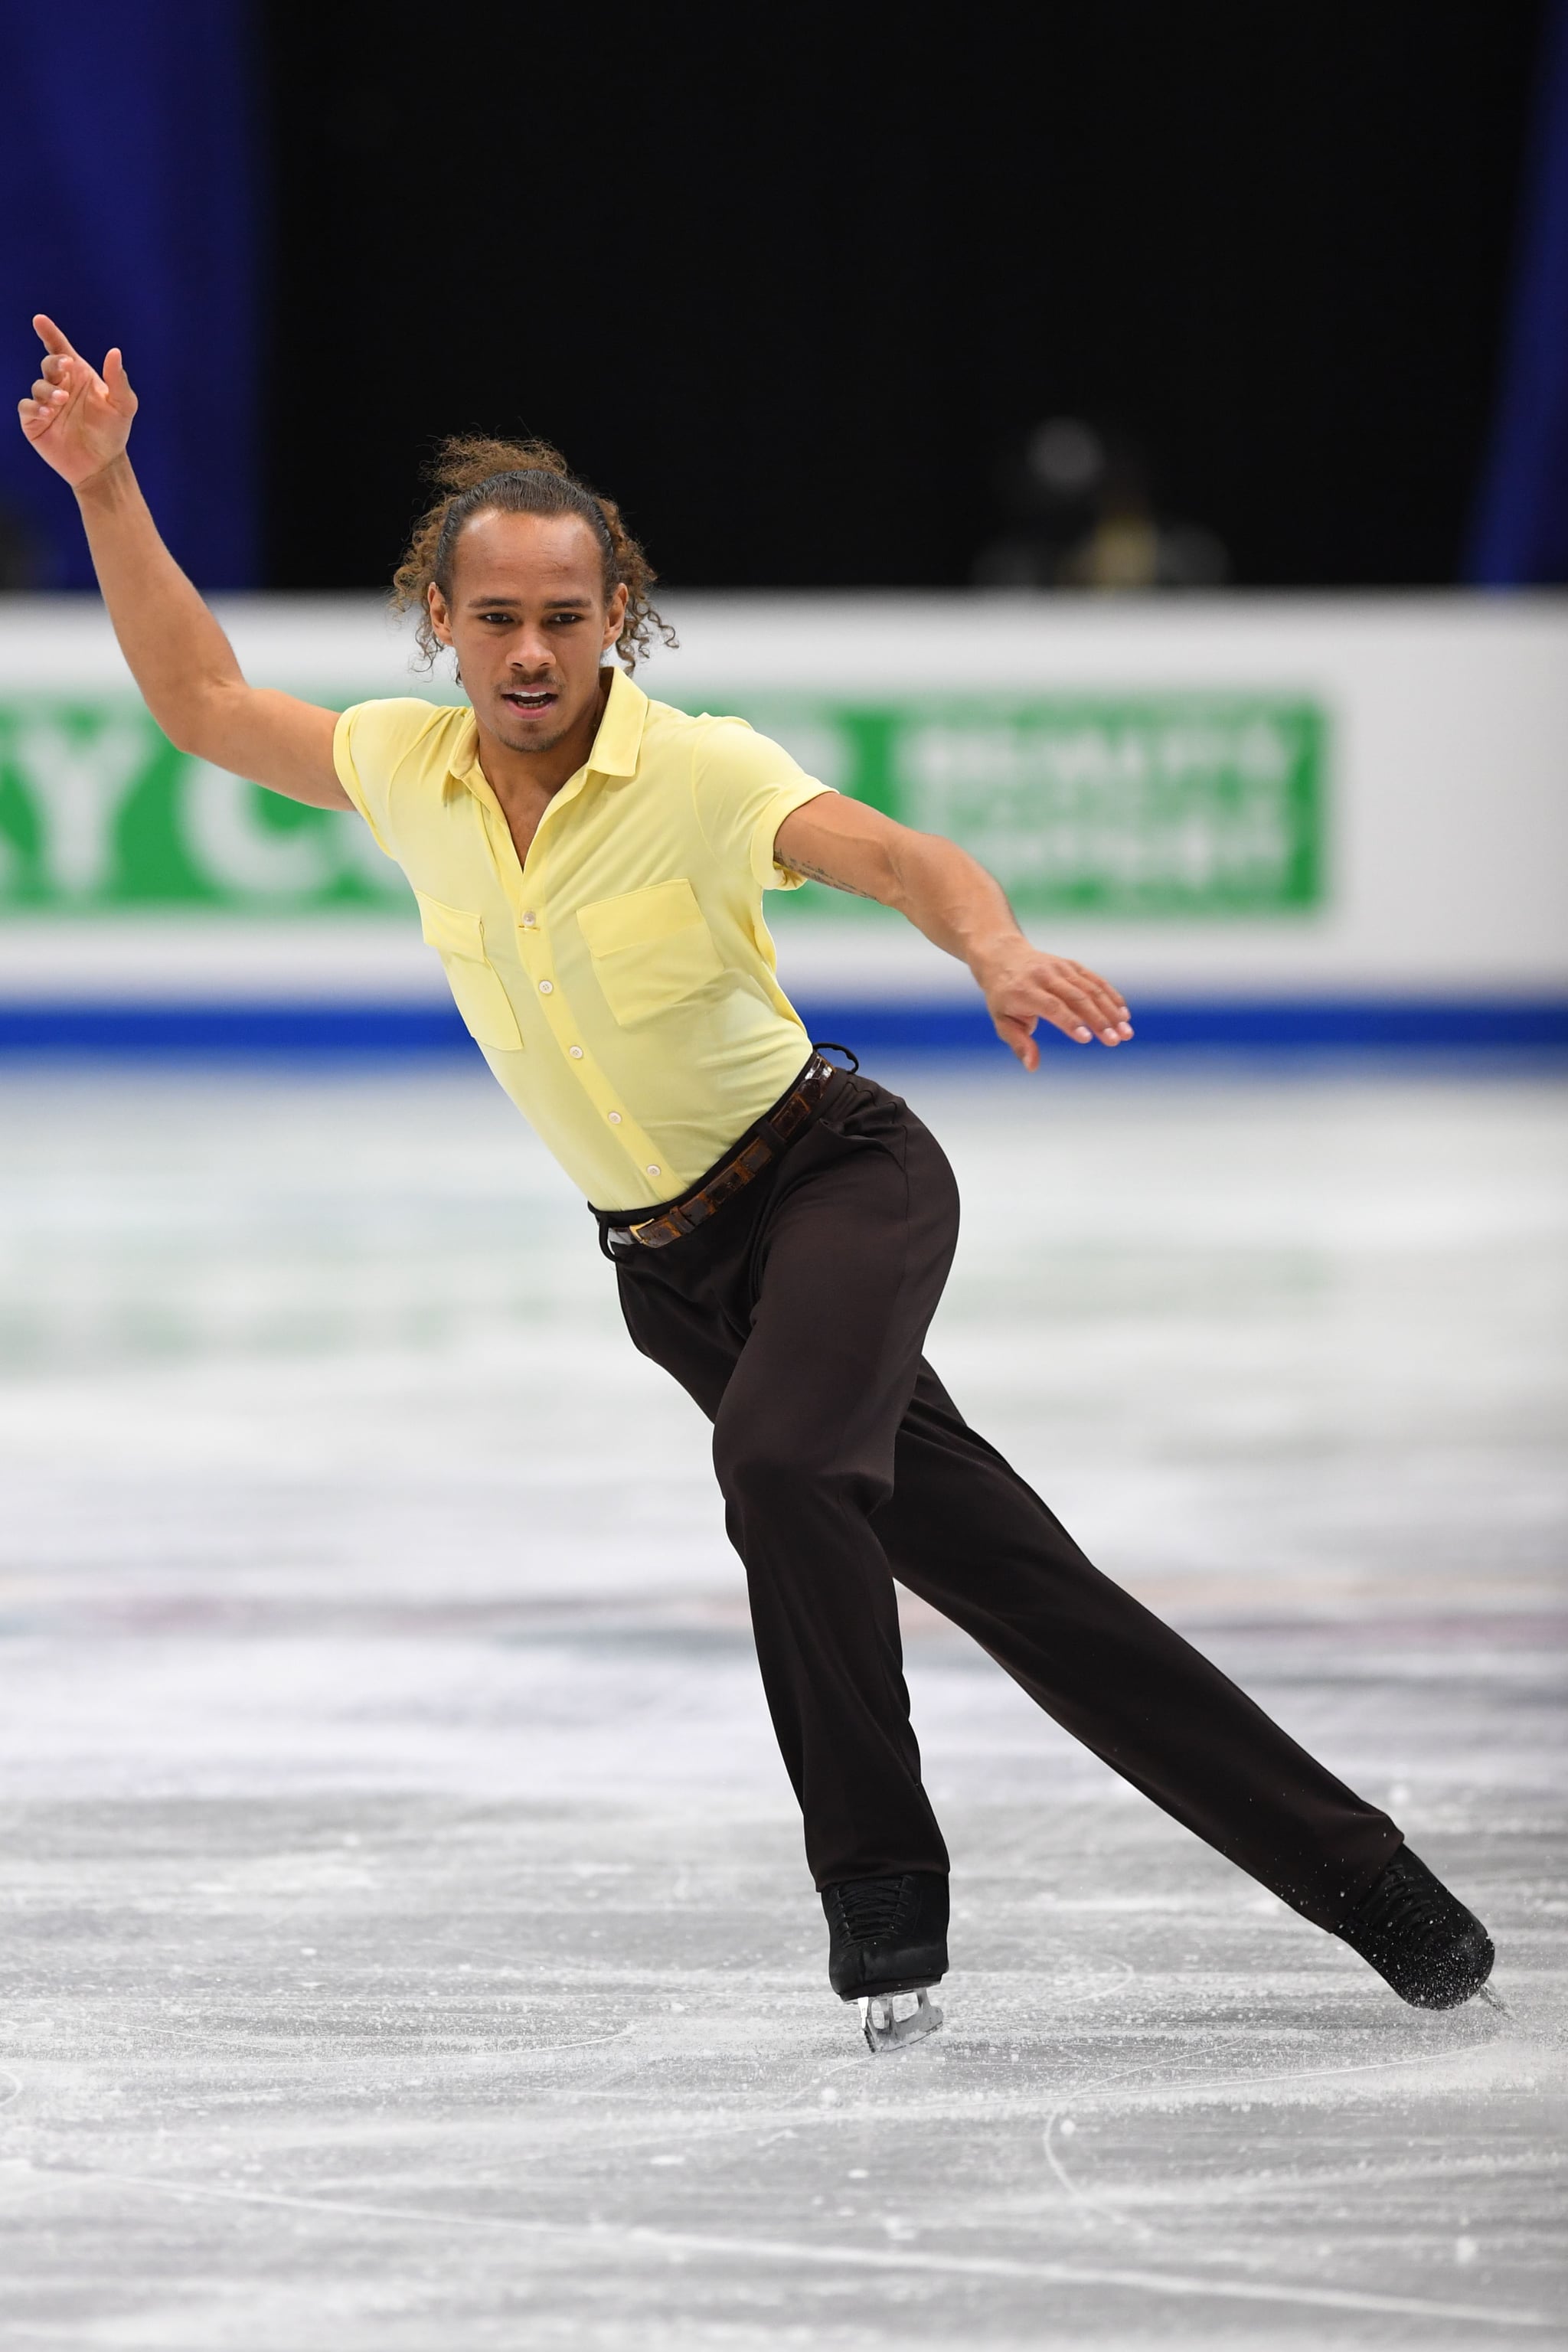 TAIPEI, TAIWAN - JANUARY 27:  Elladj Balde of Canada competes in the men free skating during day four of the Four Continents Figure Skating Championships at Taipei Arena on January 27, 2018 in Taipei, Taiwan.  (Photo by Atsushi Tomura - International Skating Union/International Skating Union via Getty Images)